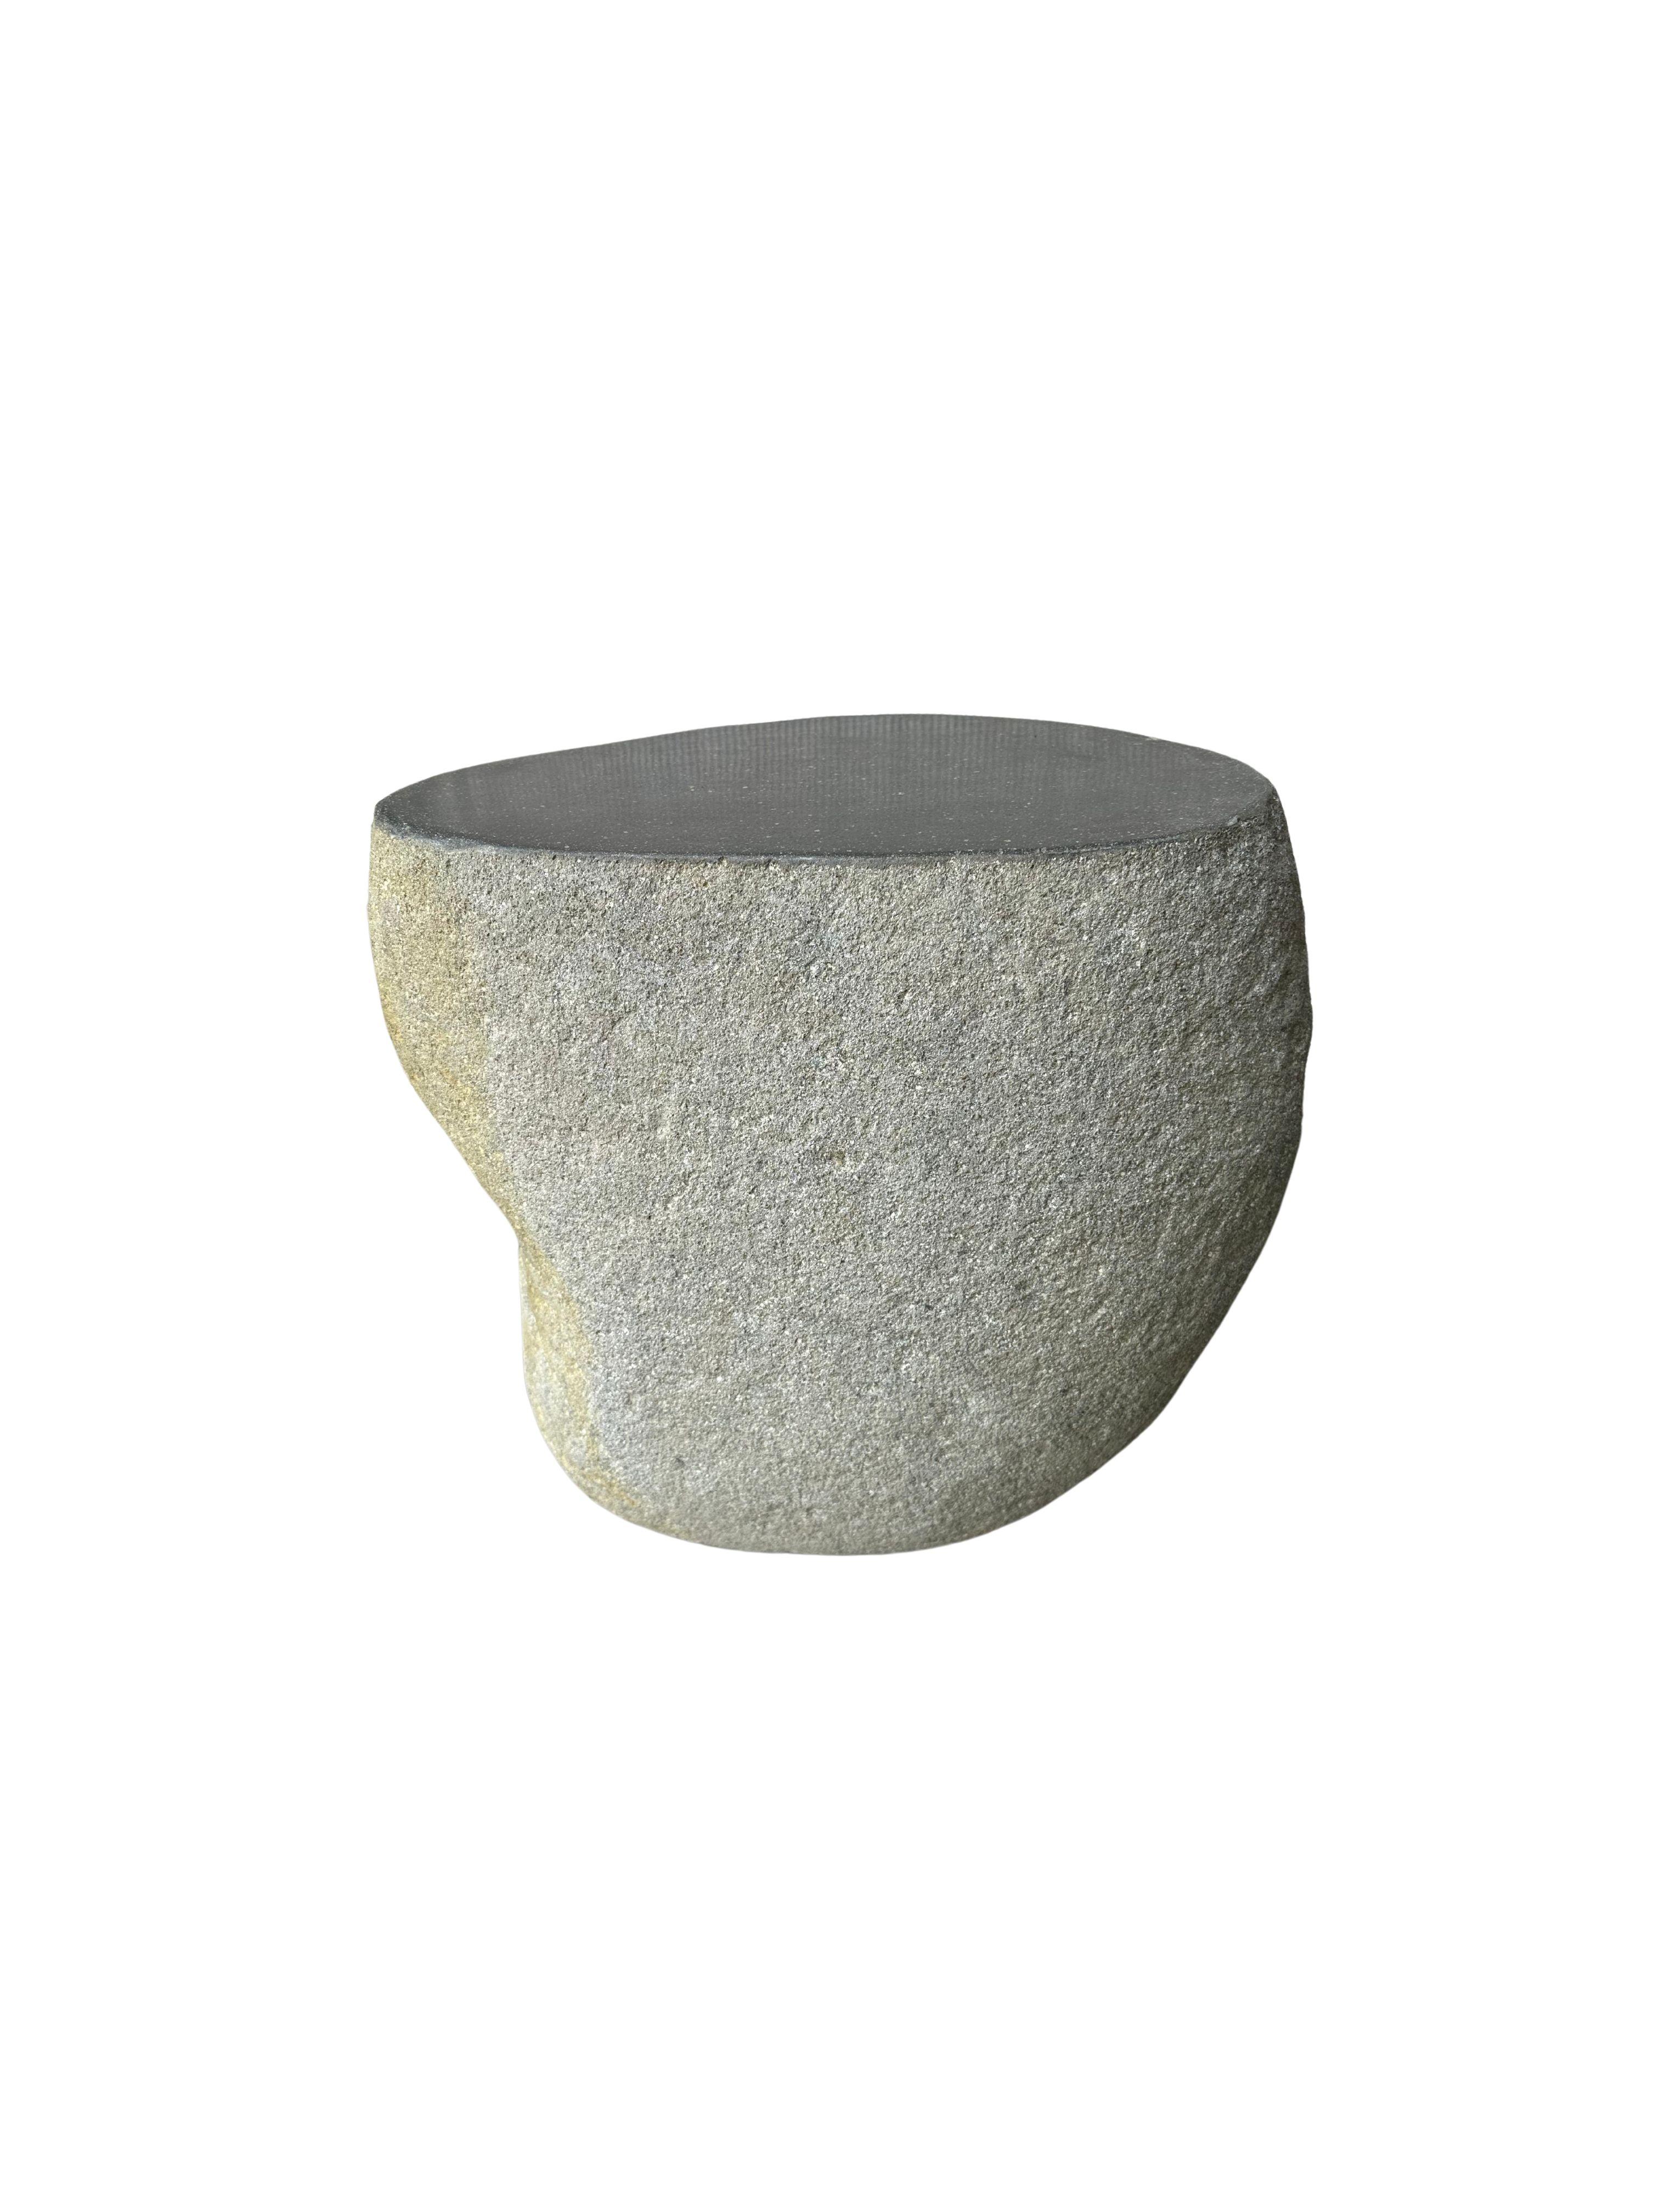 Hand-Crafted Solid Stone Side Table / Pedestal from Java, Indonesia